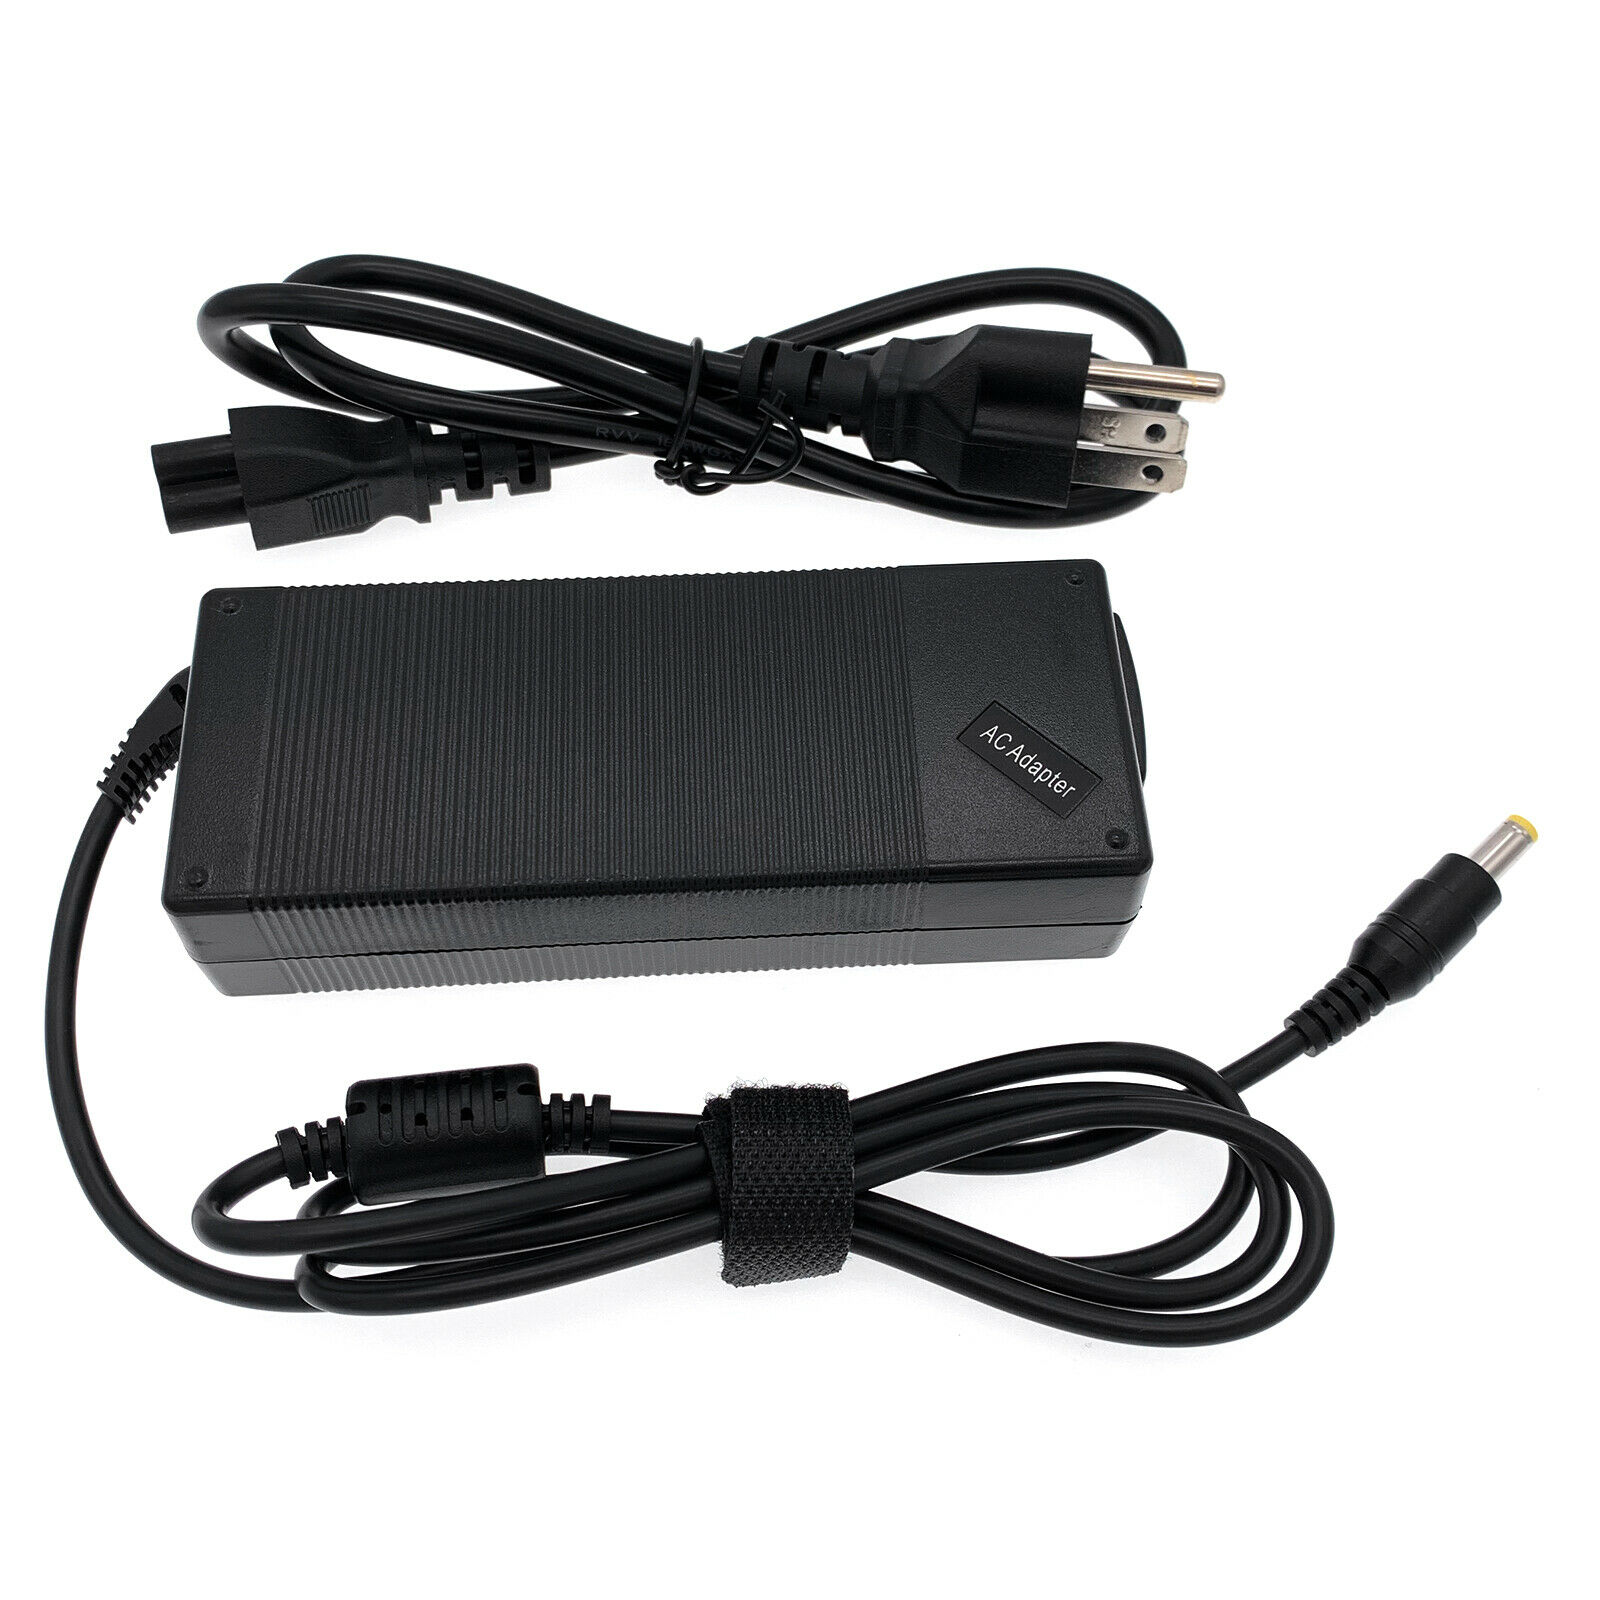 AC Adapter For Panasonic ToughBook CF-30 CF-73 ac Battery Charger Power Supply with Cord Brand: Unbranded/Generic Bund